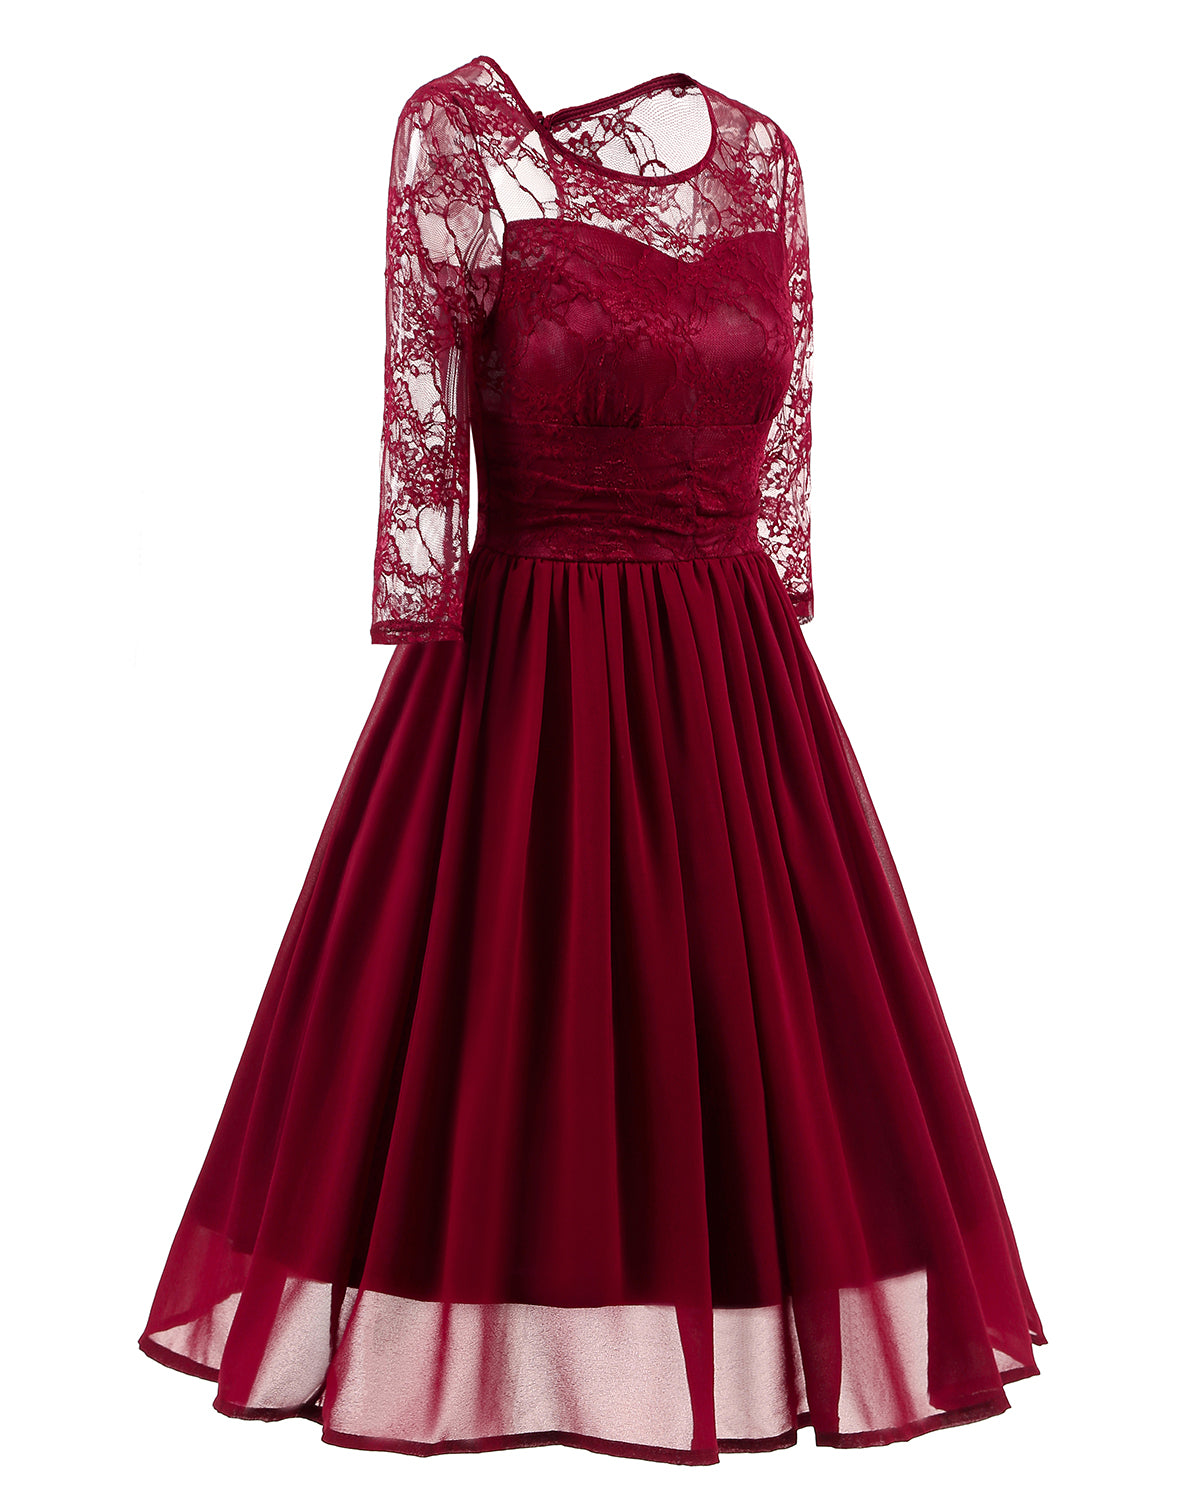 Classy Short Vintage Maroon Prom Dress with Sleeves